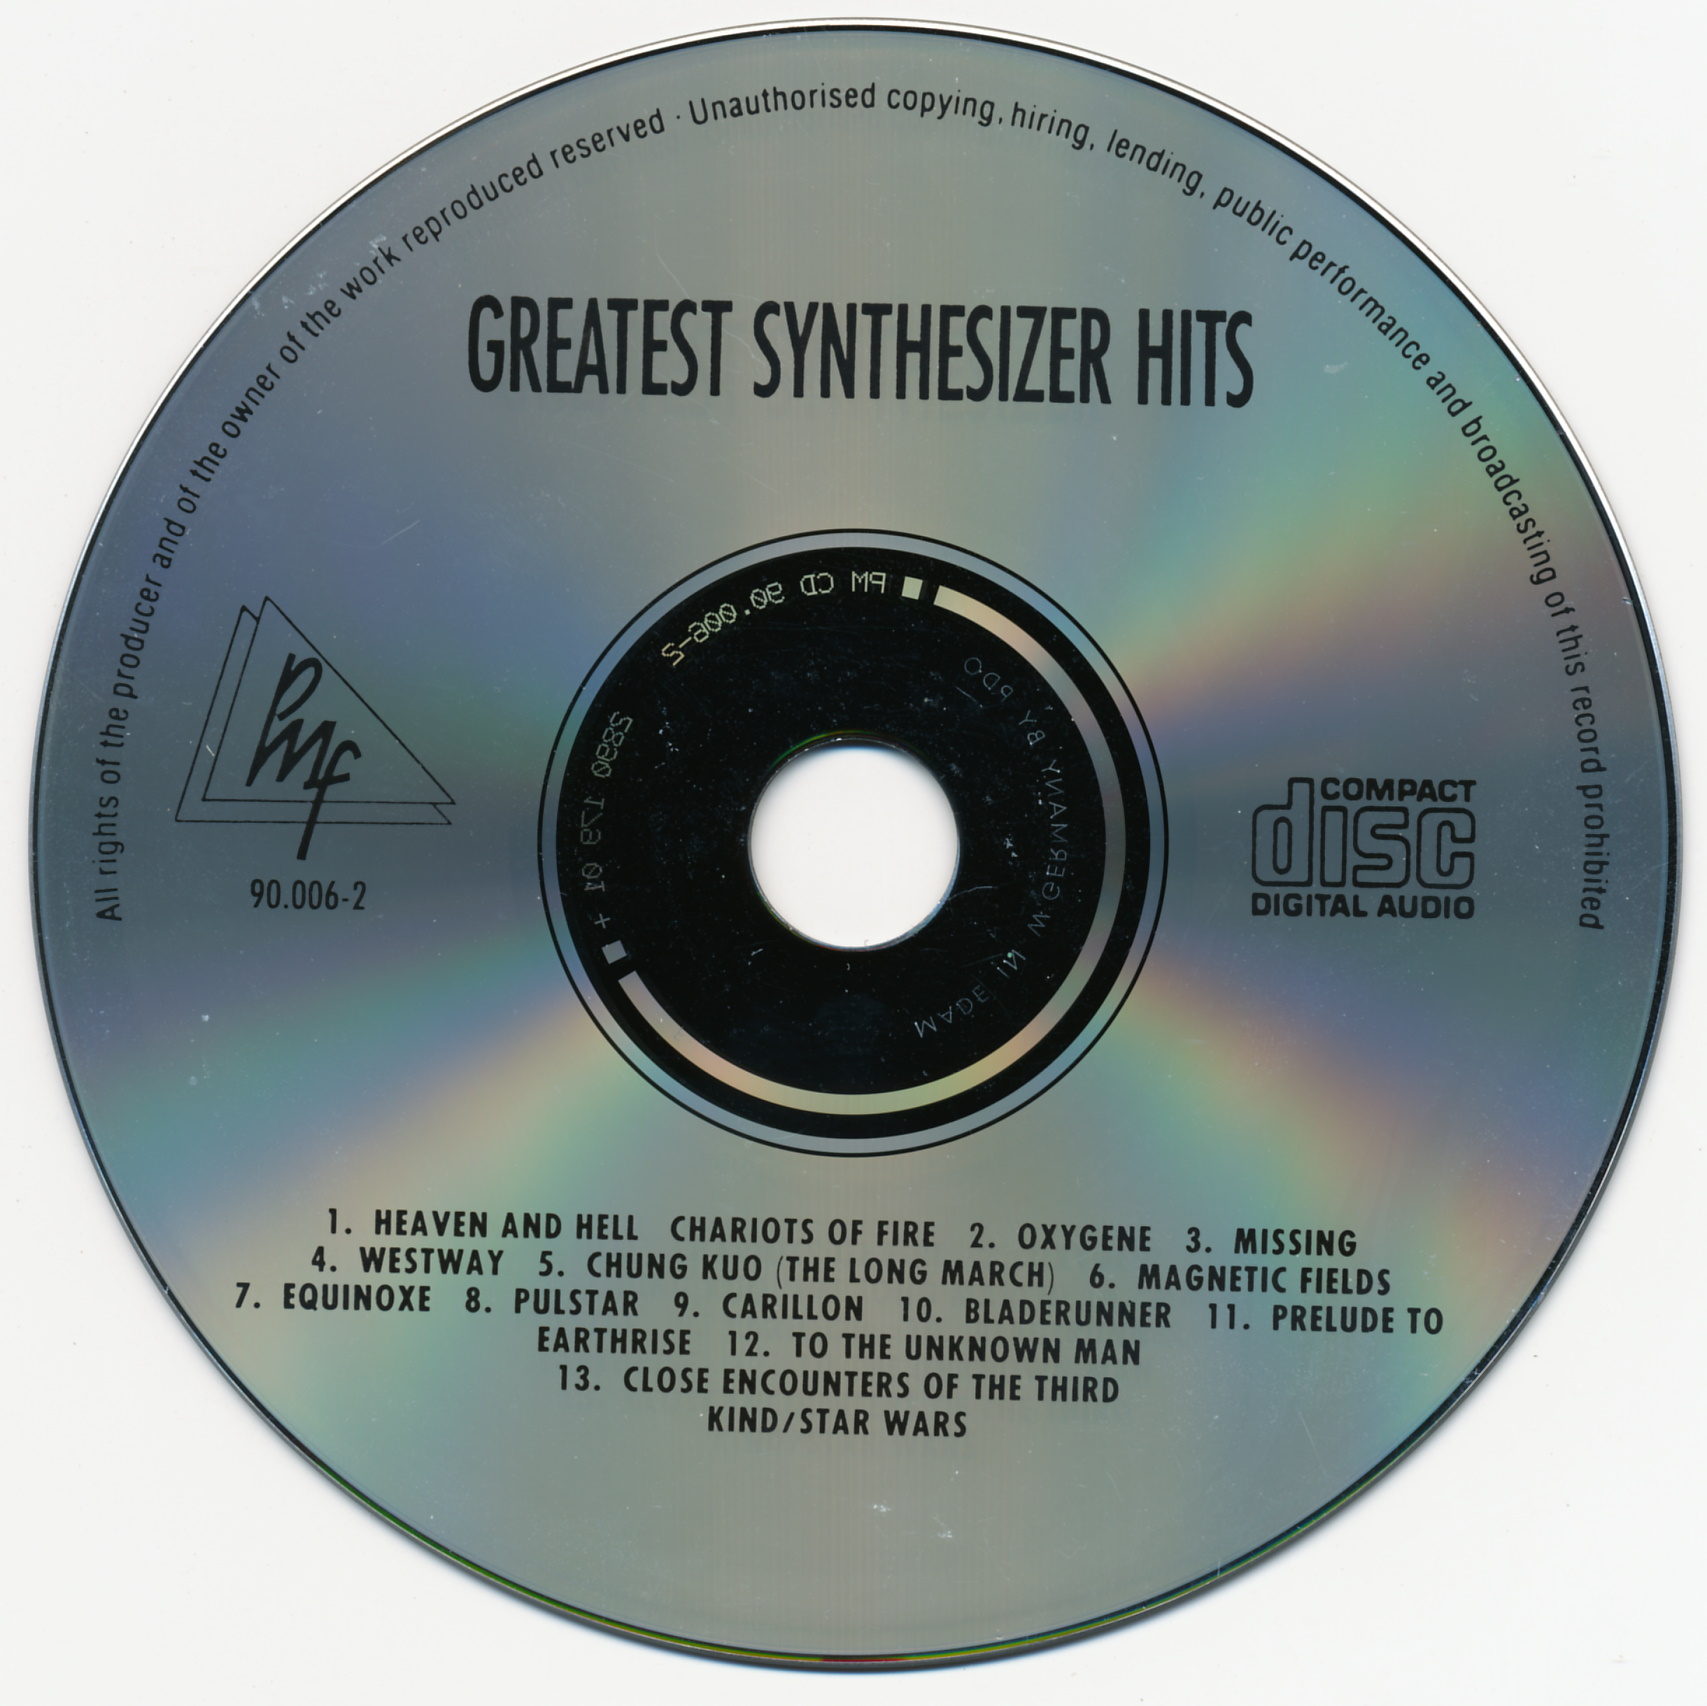 Greatest Synthesizer Hits (1990)